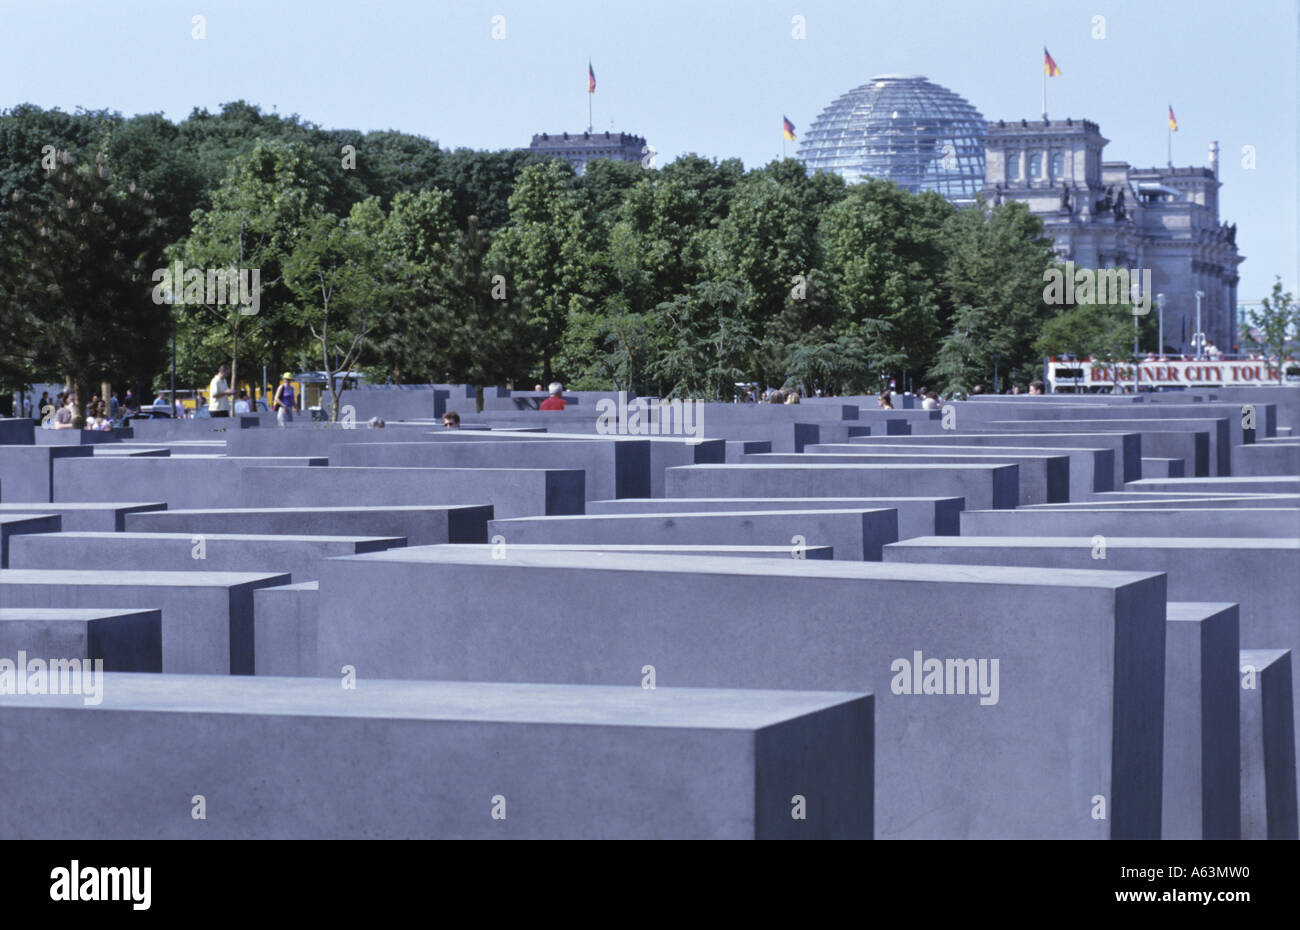 Concrete steles at memorial with buildings in background, Monument To The Murdered Jews Of Europe, Berlin, Germany Stock Photo